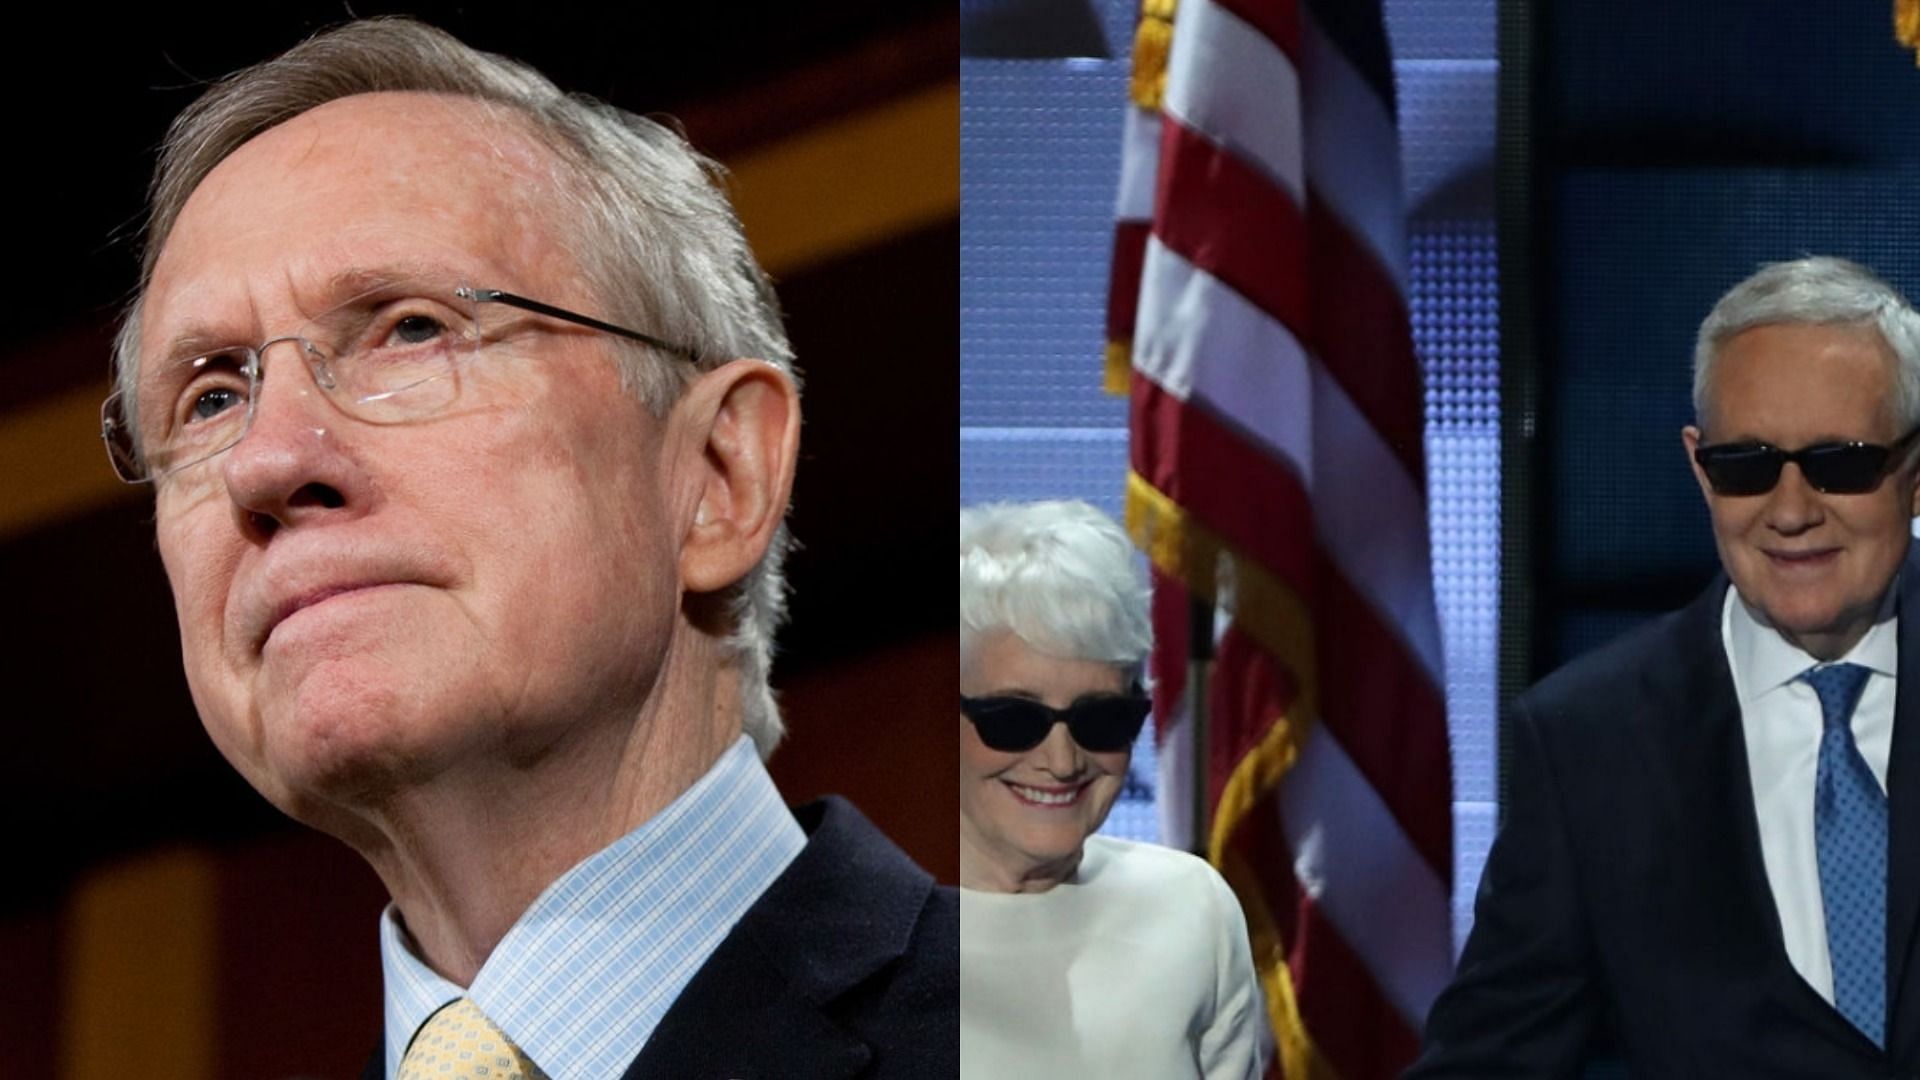 U.S. Senate Majority Leader Harry Reid passed away after a battle with pancreatic cancer (Image via Brendan Hoffman/Getty Images and Alex Wong/Getty Images)